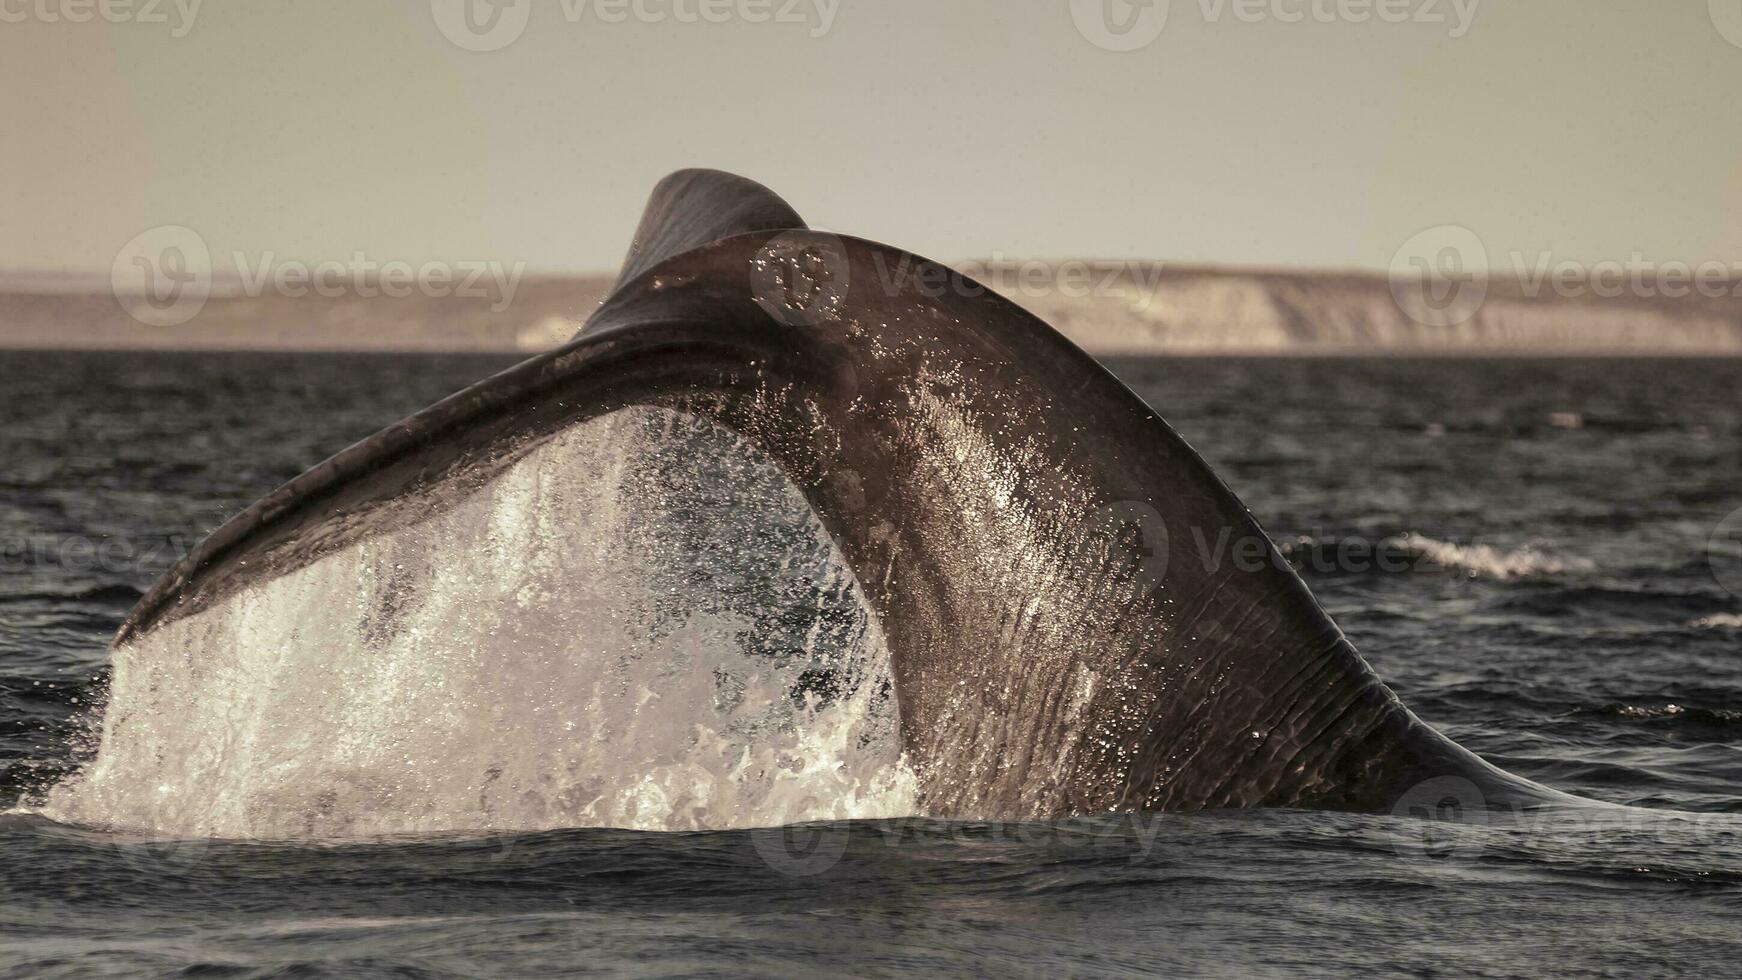 Sohutern right whale  lobtailing, endangered species, Patagonia,Argentina photo